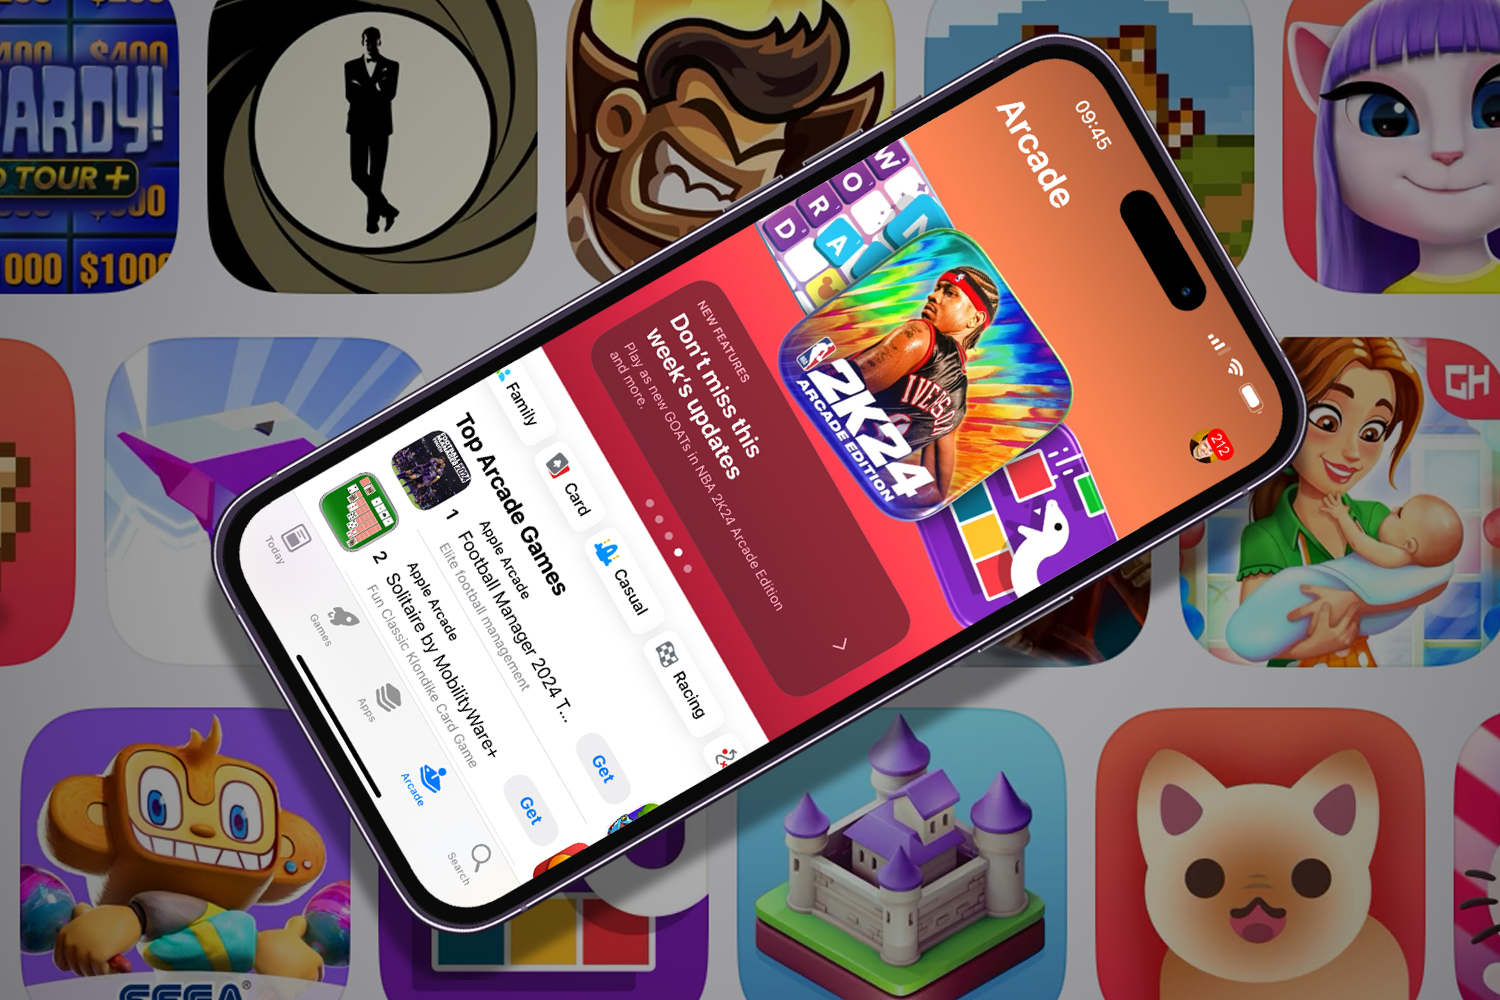 Apple is now hand-picking games in every genre